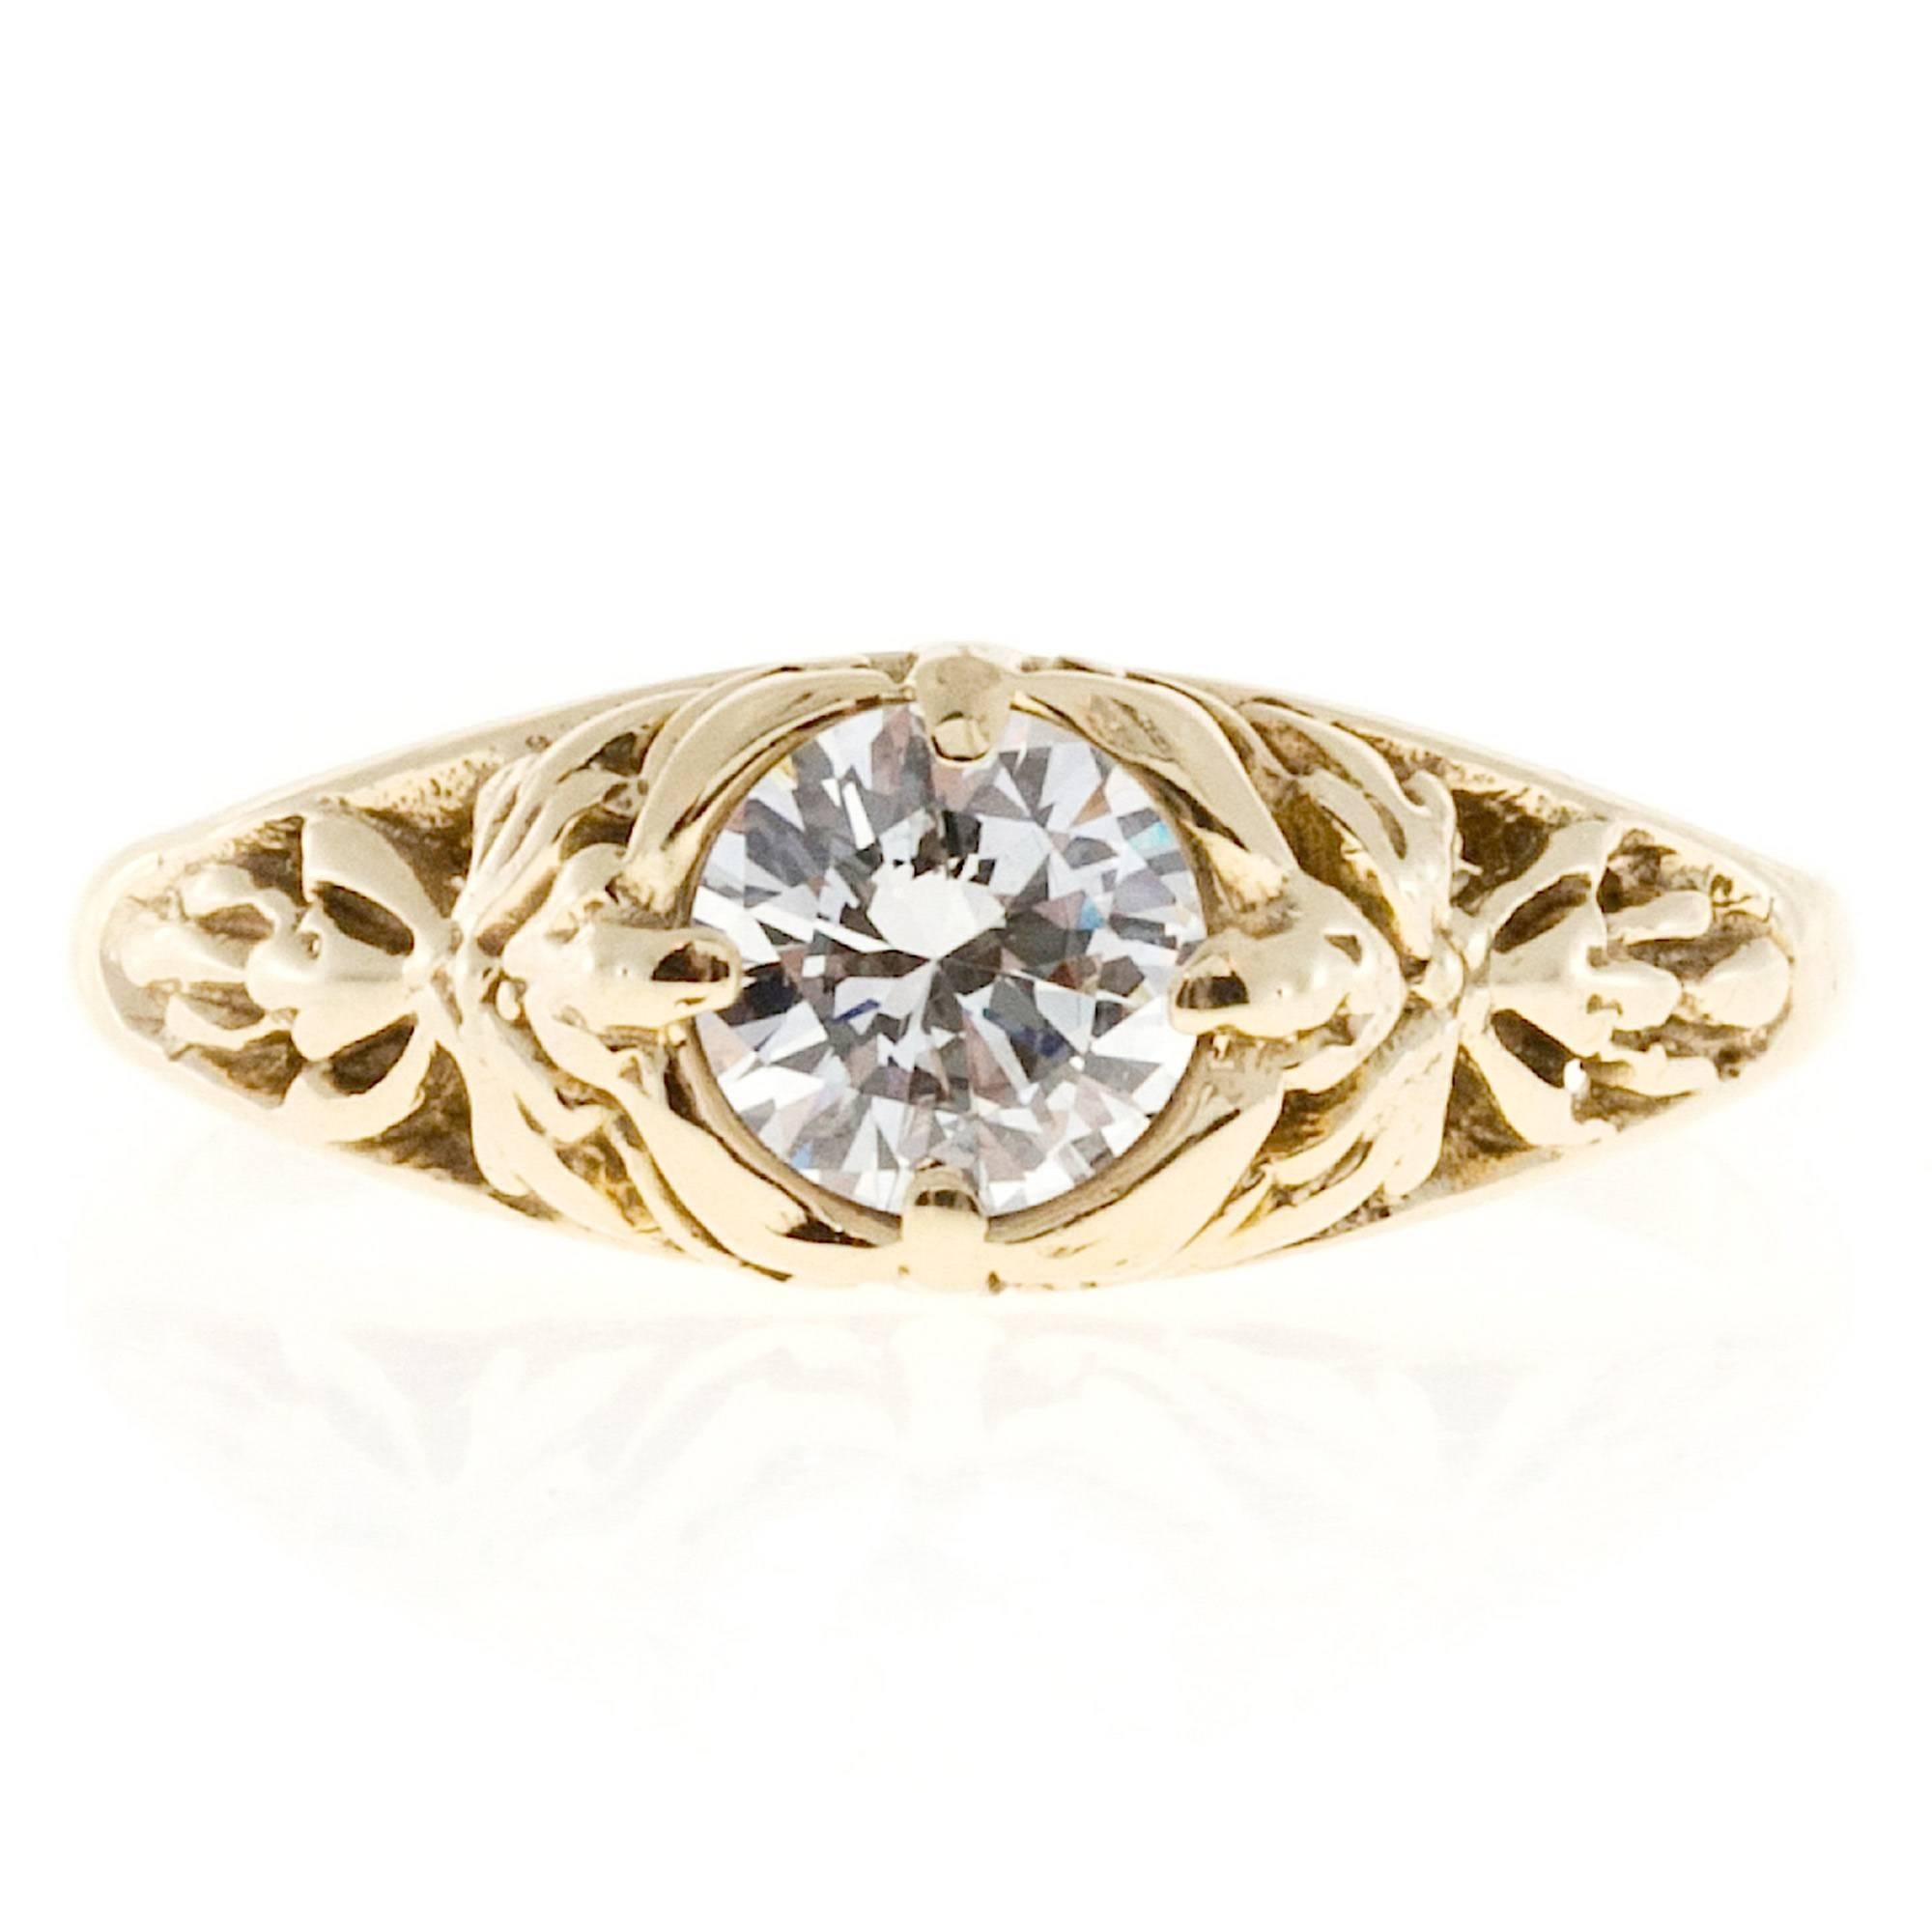 Estate filigree 14k yellow gold engagement ring with a transitional cut extra high grade round diamond. .

1 round diamond, approx. total weight .43cts, E – F, VS2, 
14k yellow gold
Tested: 14k
2.0 grams
Width at top: 6.45mm
Height at top: